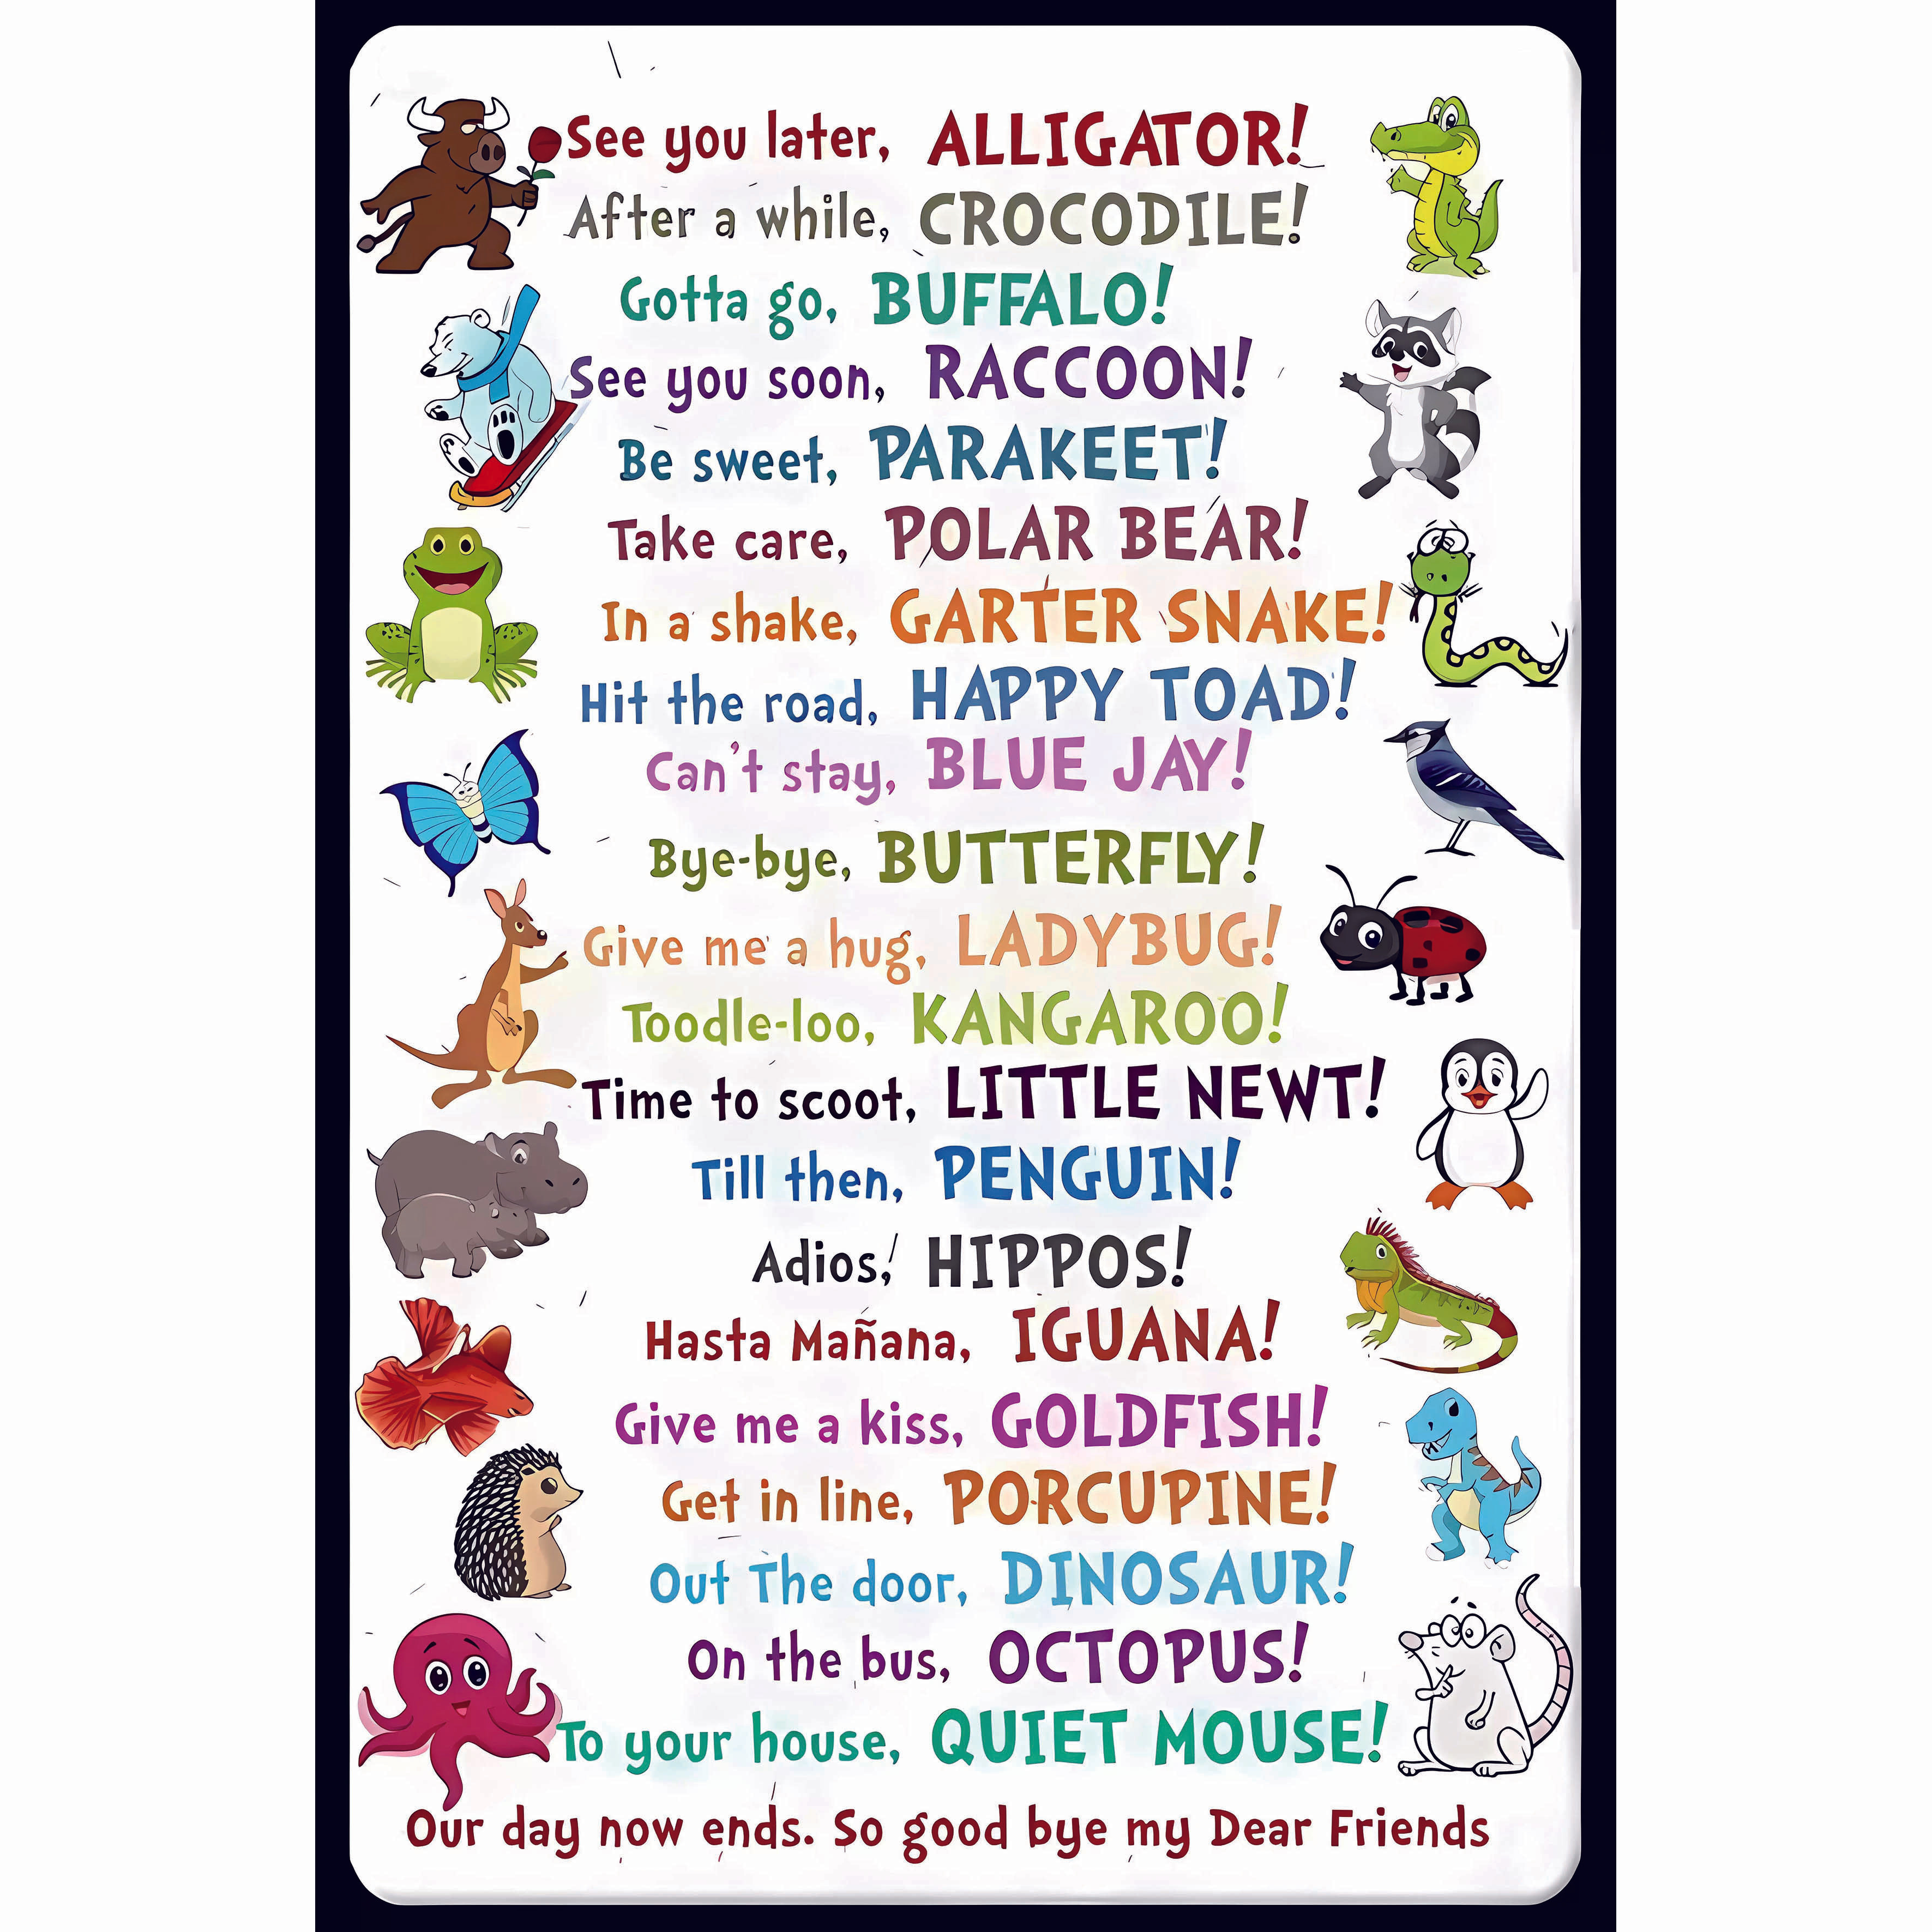 

2pcs Tin Metal Sign Funny Animal Poster See You Later Alligator Home Decor Wall Art Christmas Housewarming Birthday Gifts Back To School Student Teacher Office Decor (8''x12''/20cm*30cm)